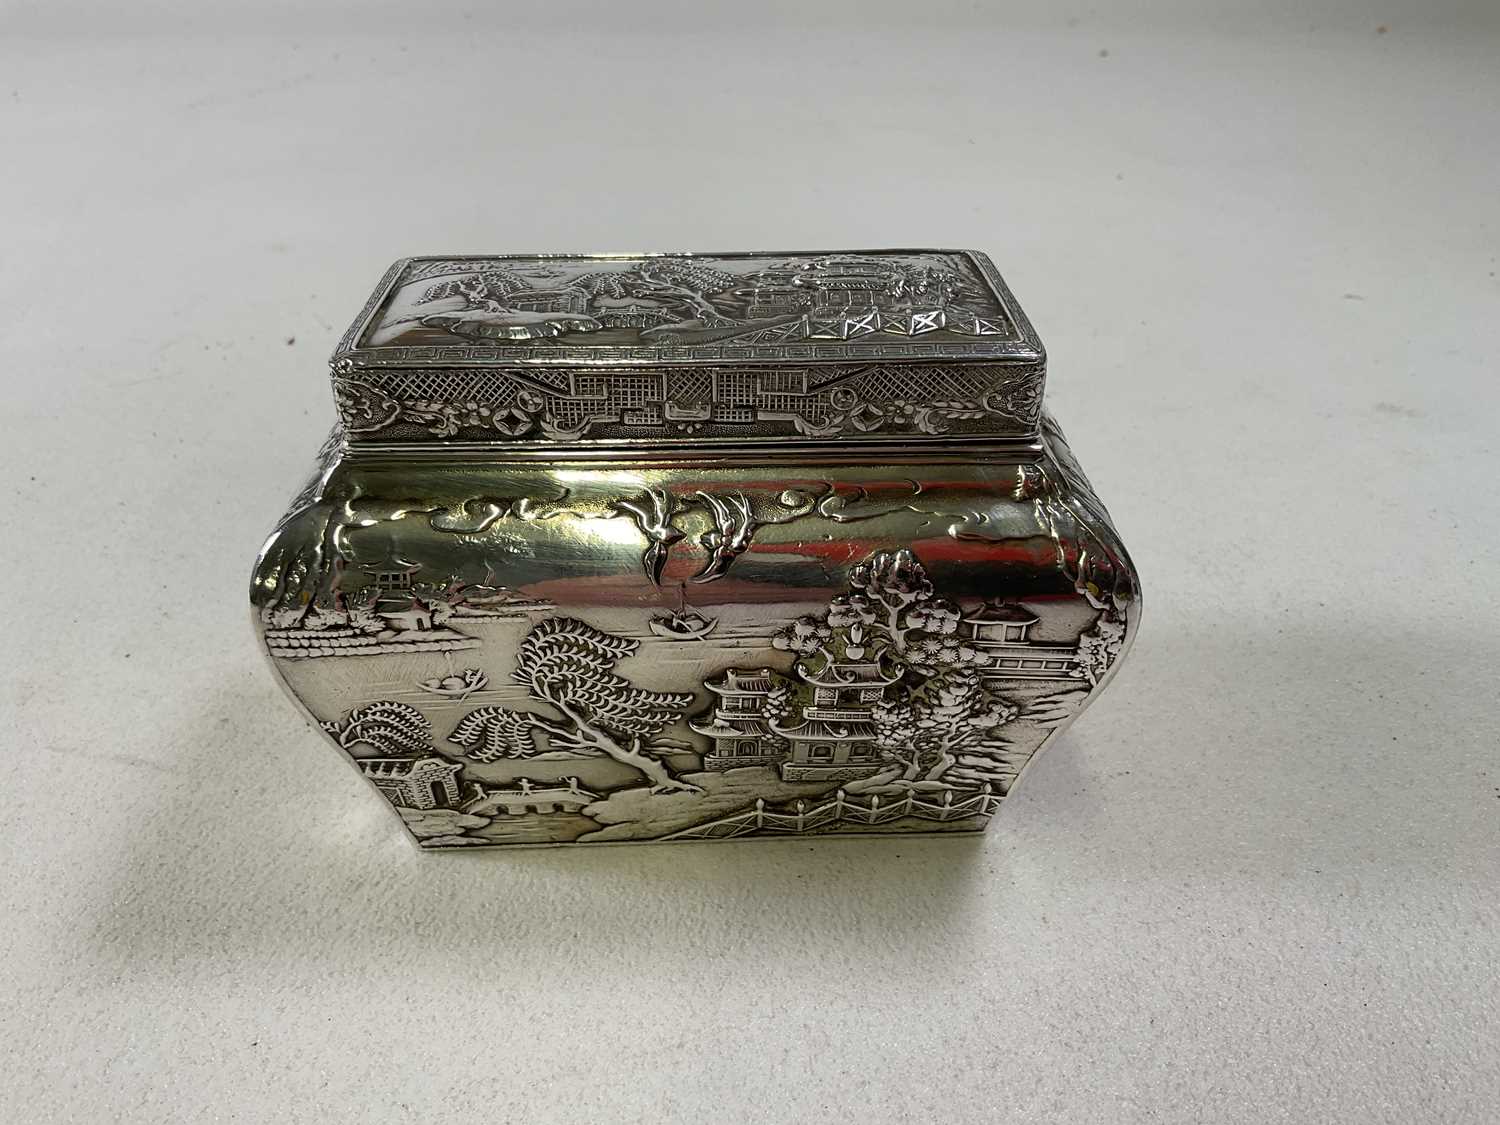 A circa 1900 Chinese white metal tea caddy with lift-off cover, inner liner and bombe body decorated